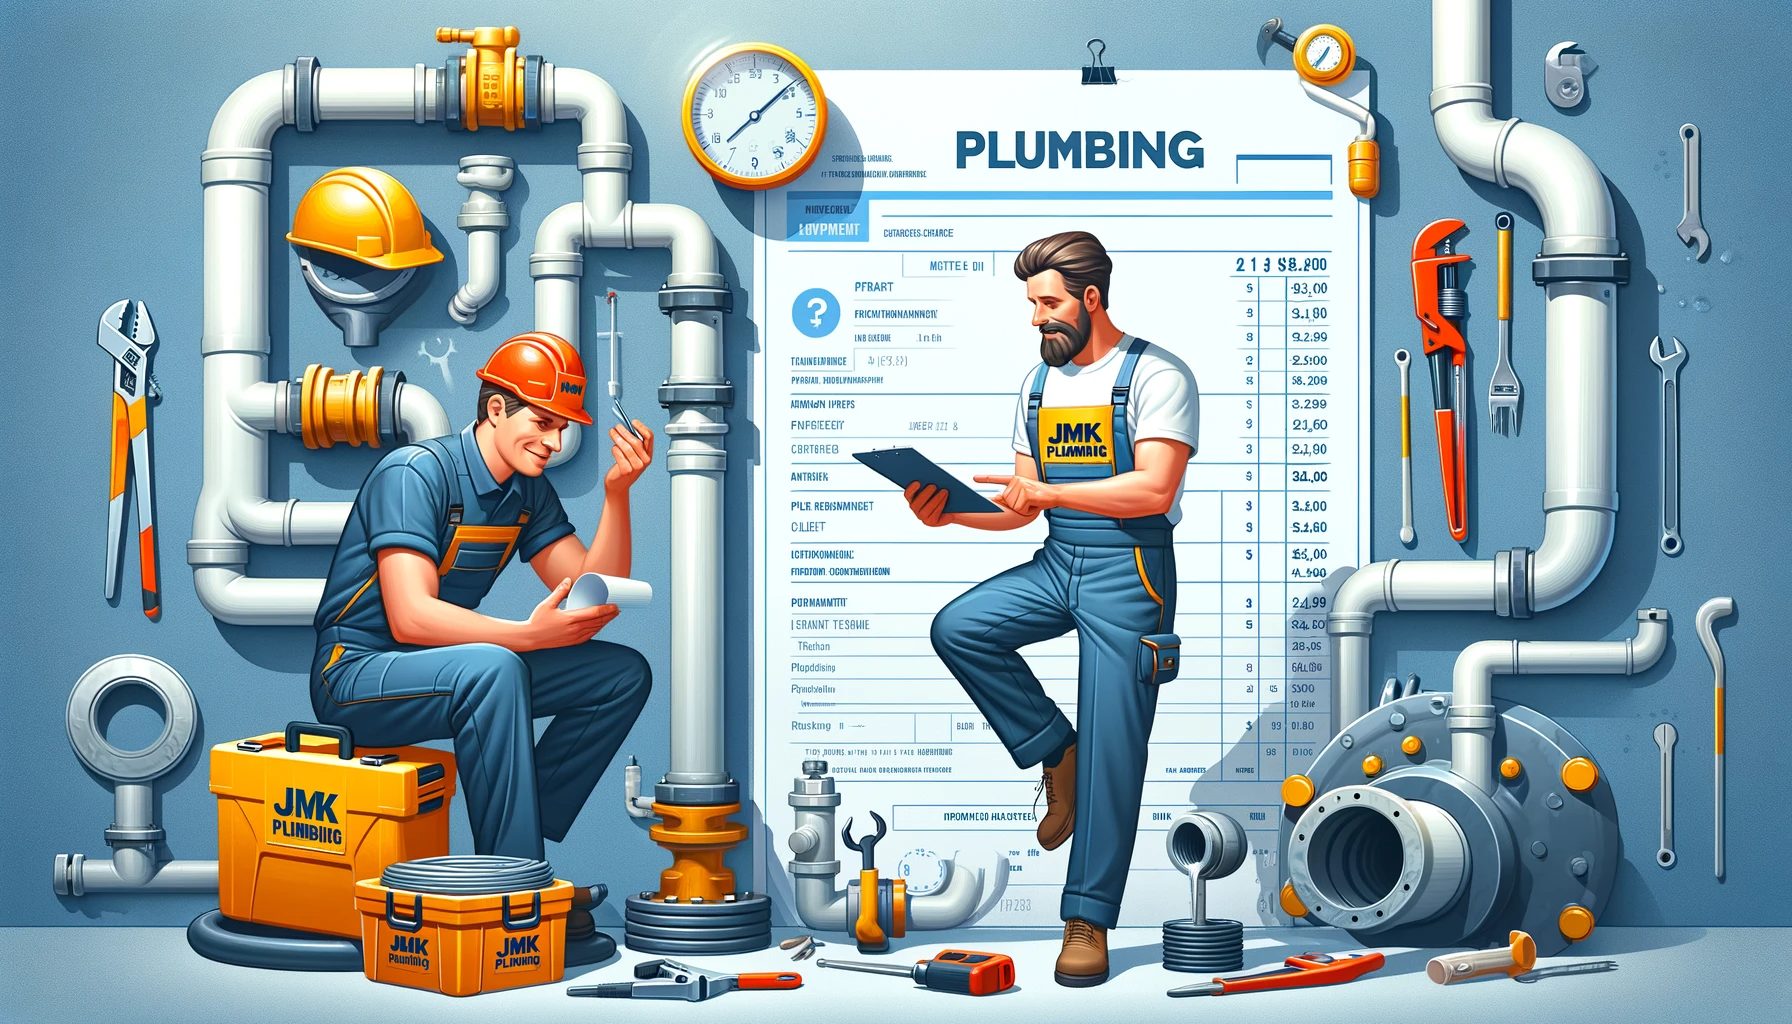 the JMK Plumbing team working on an urgent pipe repair and invoicing the client.